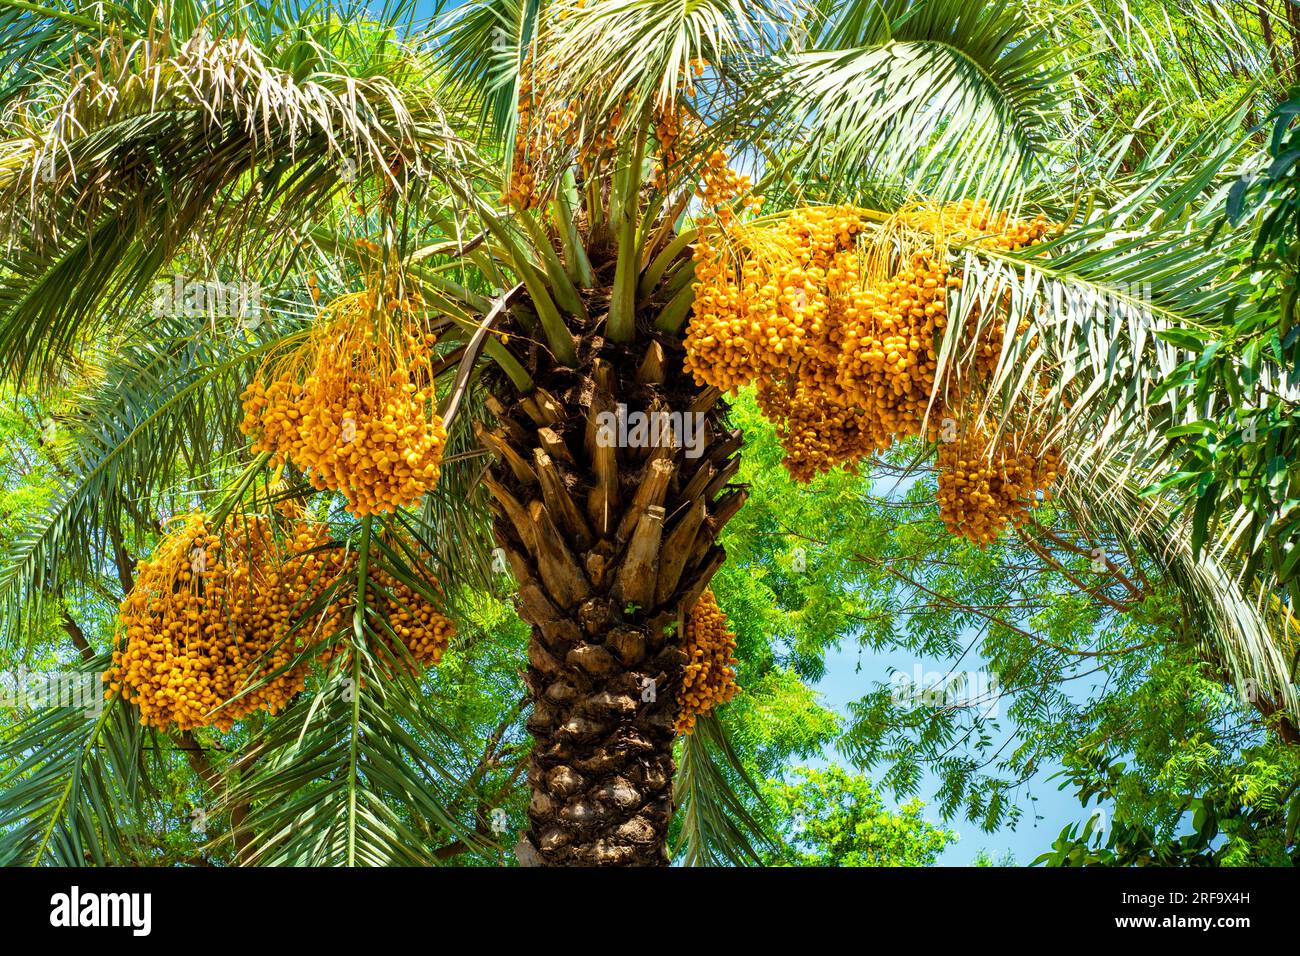 Bunches of yellow dates in the Oman Stock Photo